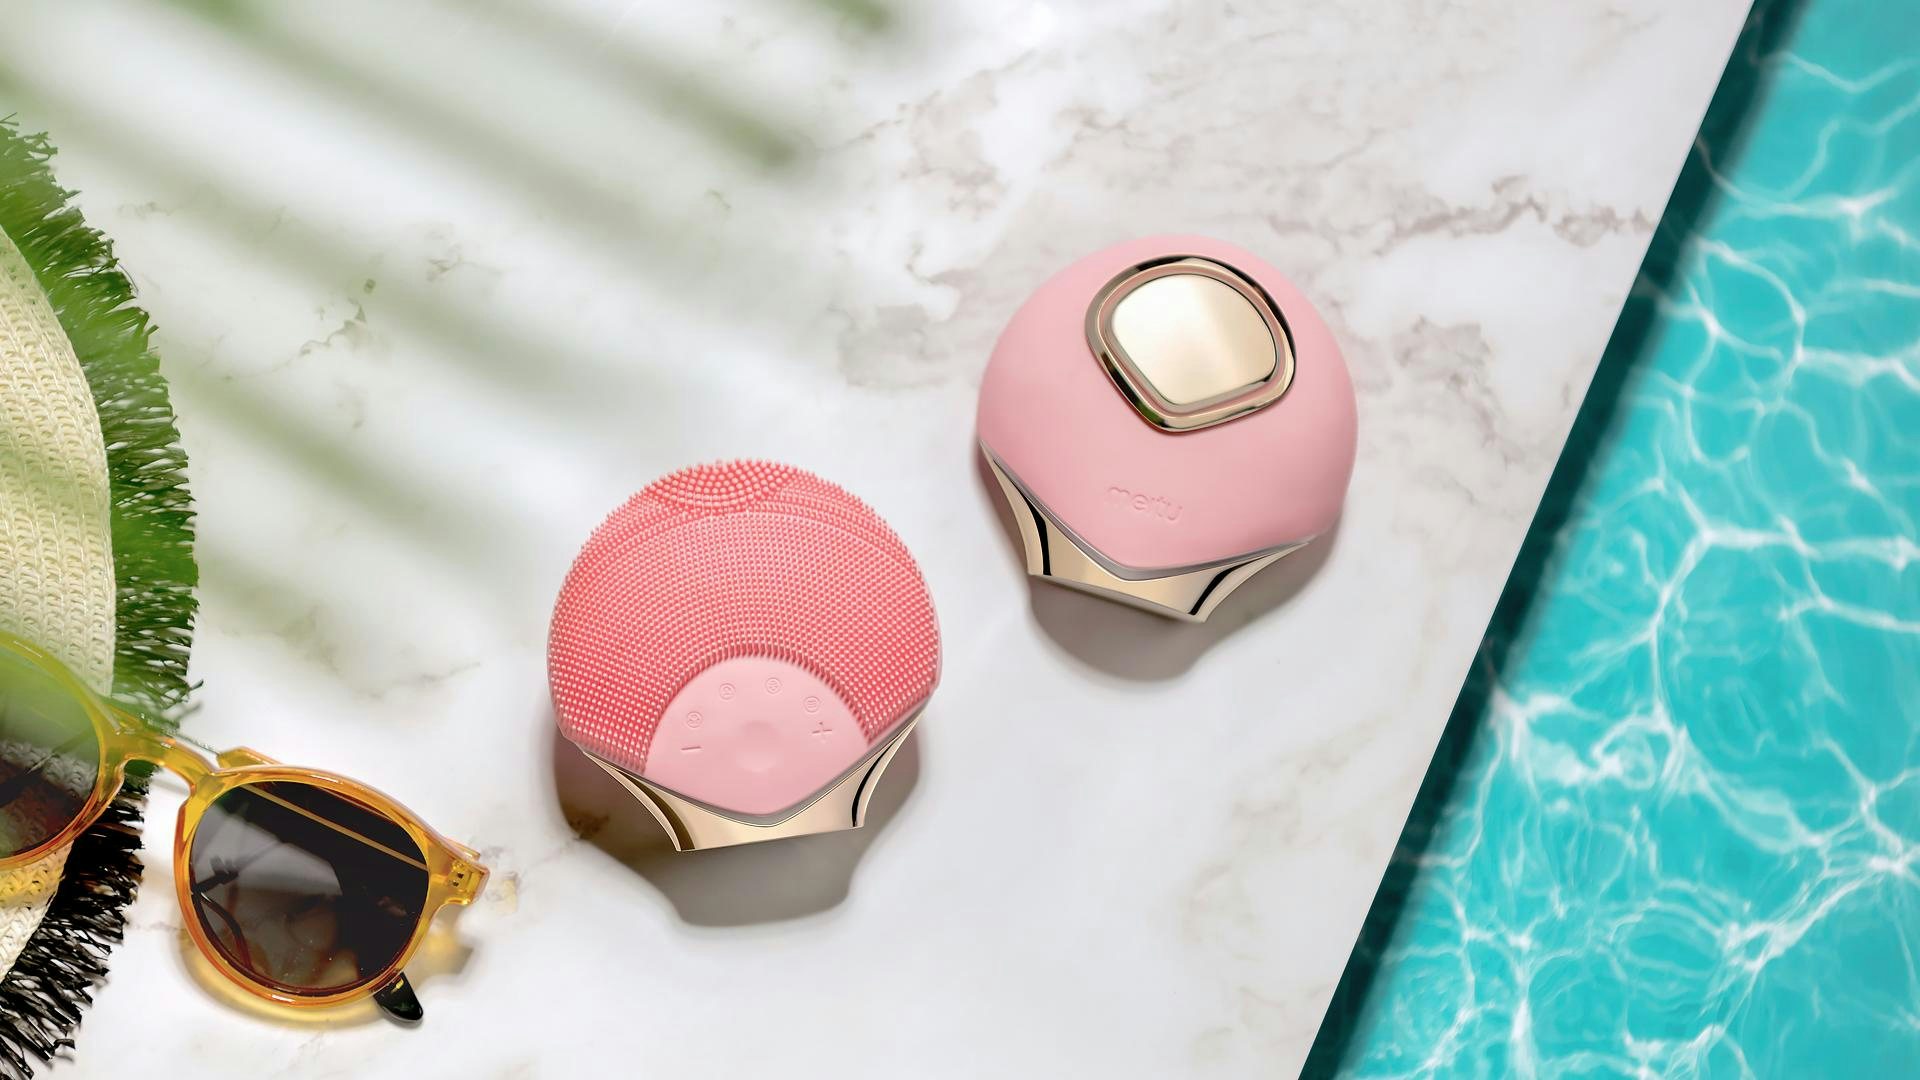 The beauty segment has traditionally performed well for luxury houses, but the pandemic has changed the way brands must approach their beauty consumers. Photo: Meitu